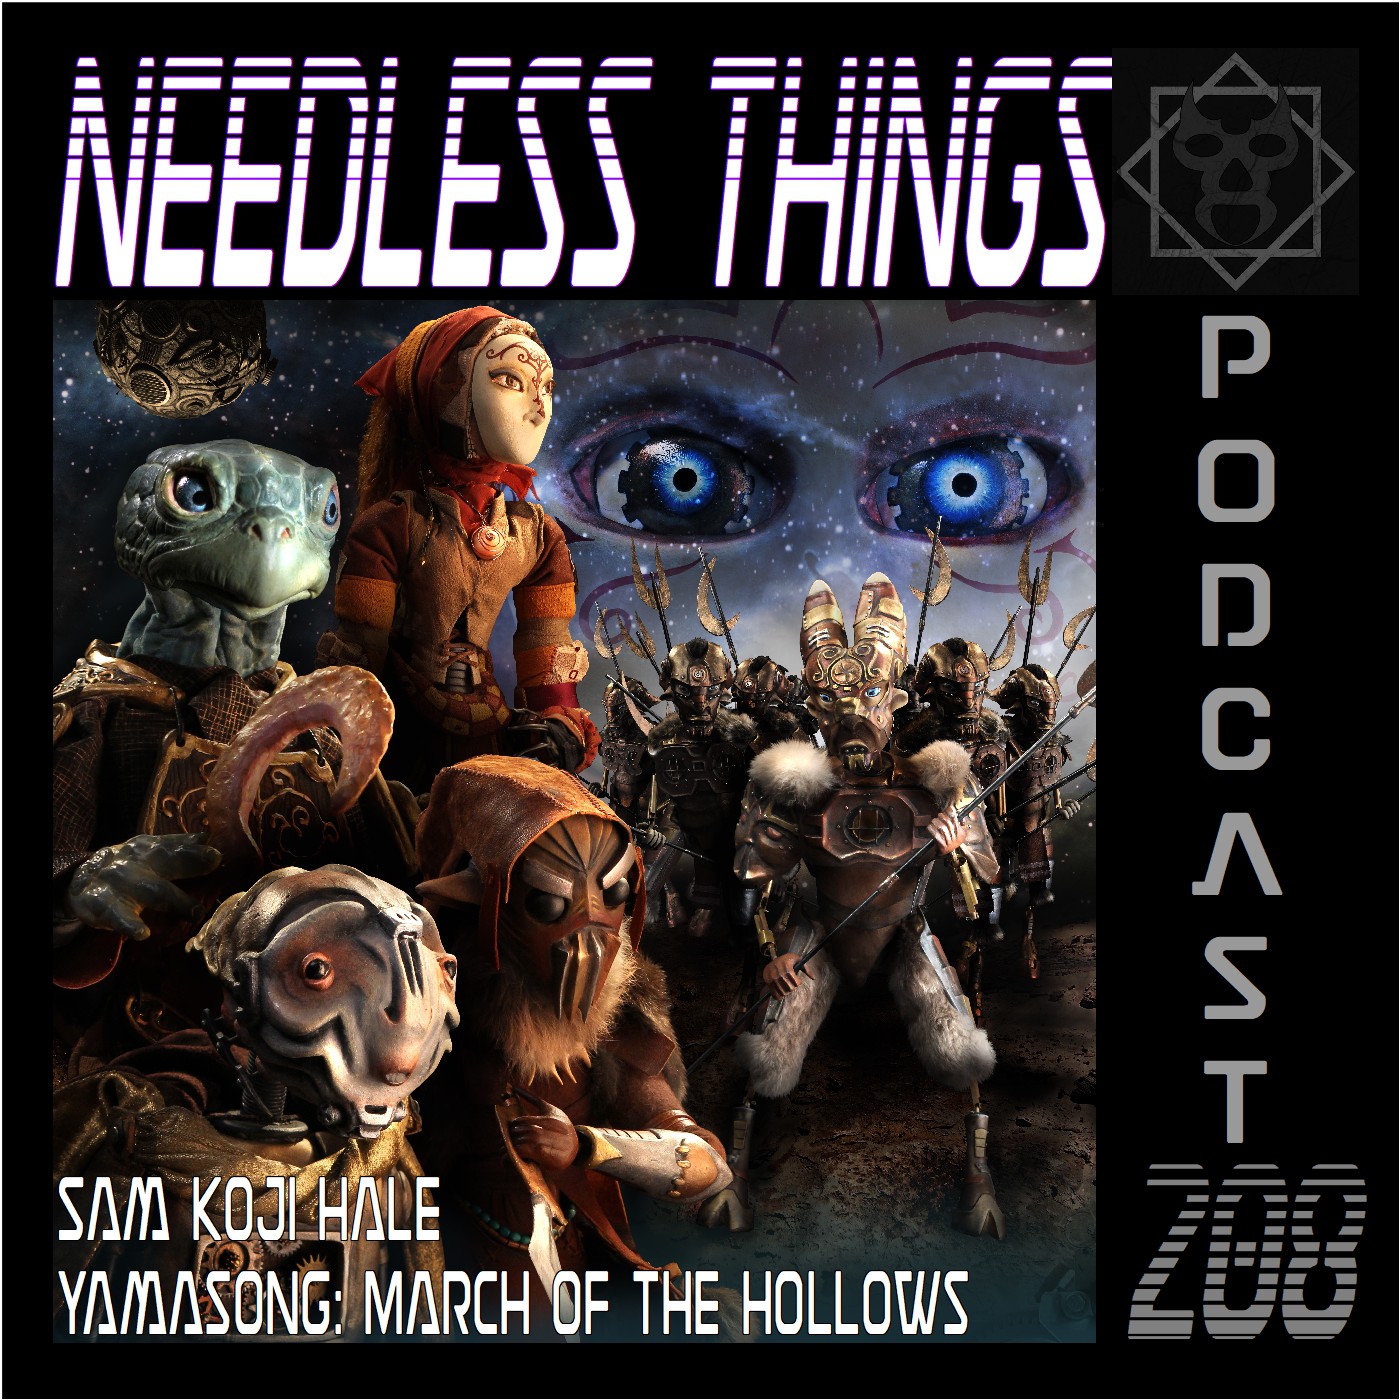 Needless Things Podcast 208 – Sam K. Hale – Yamasong: March of the Hollows